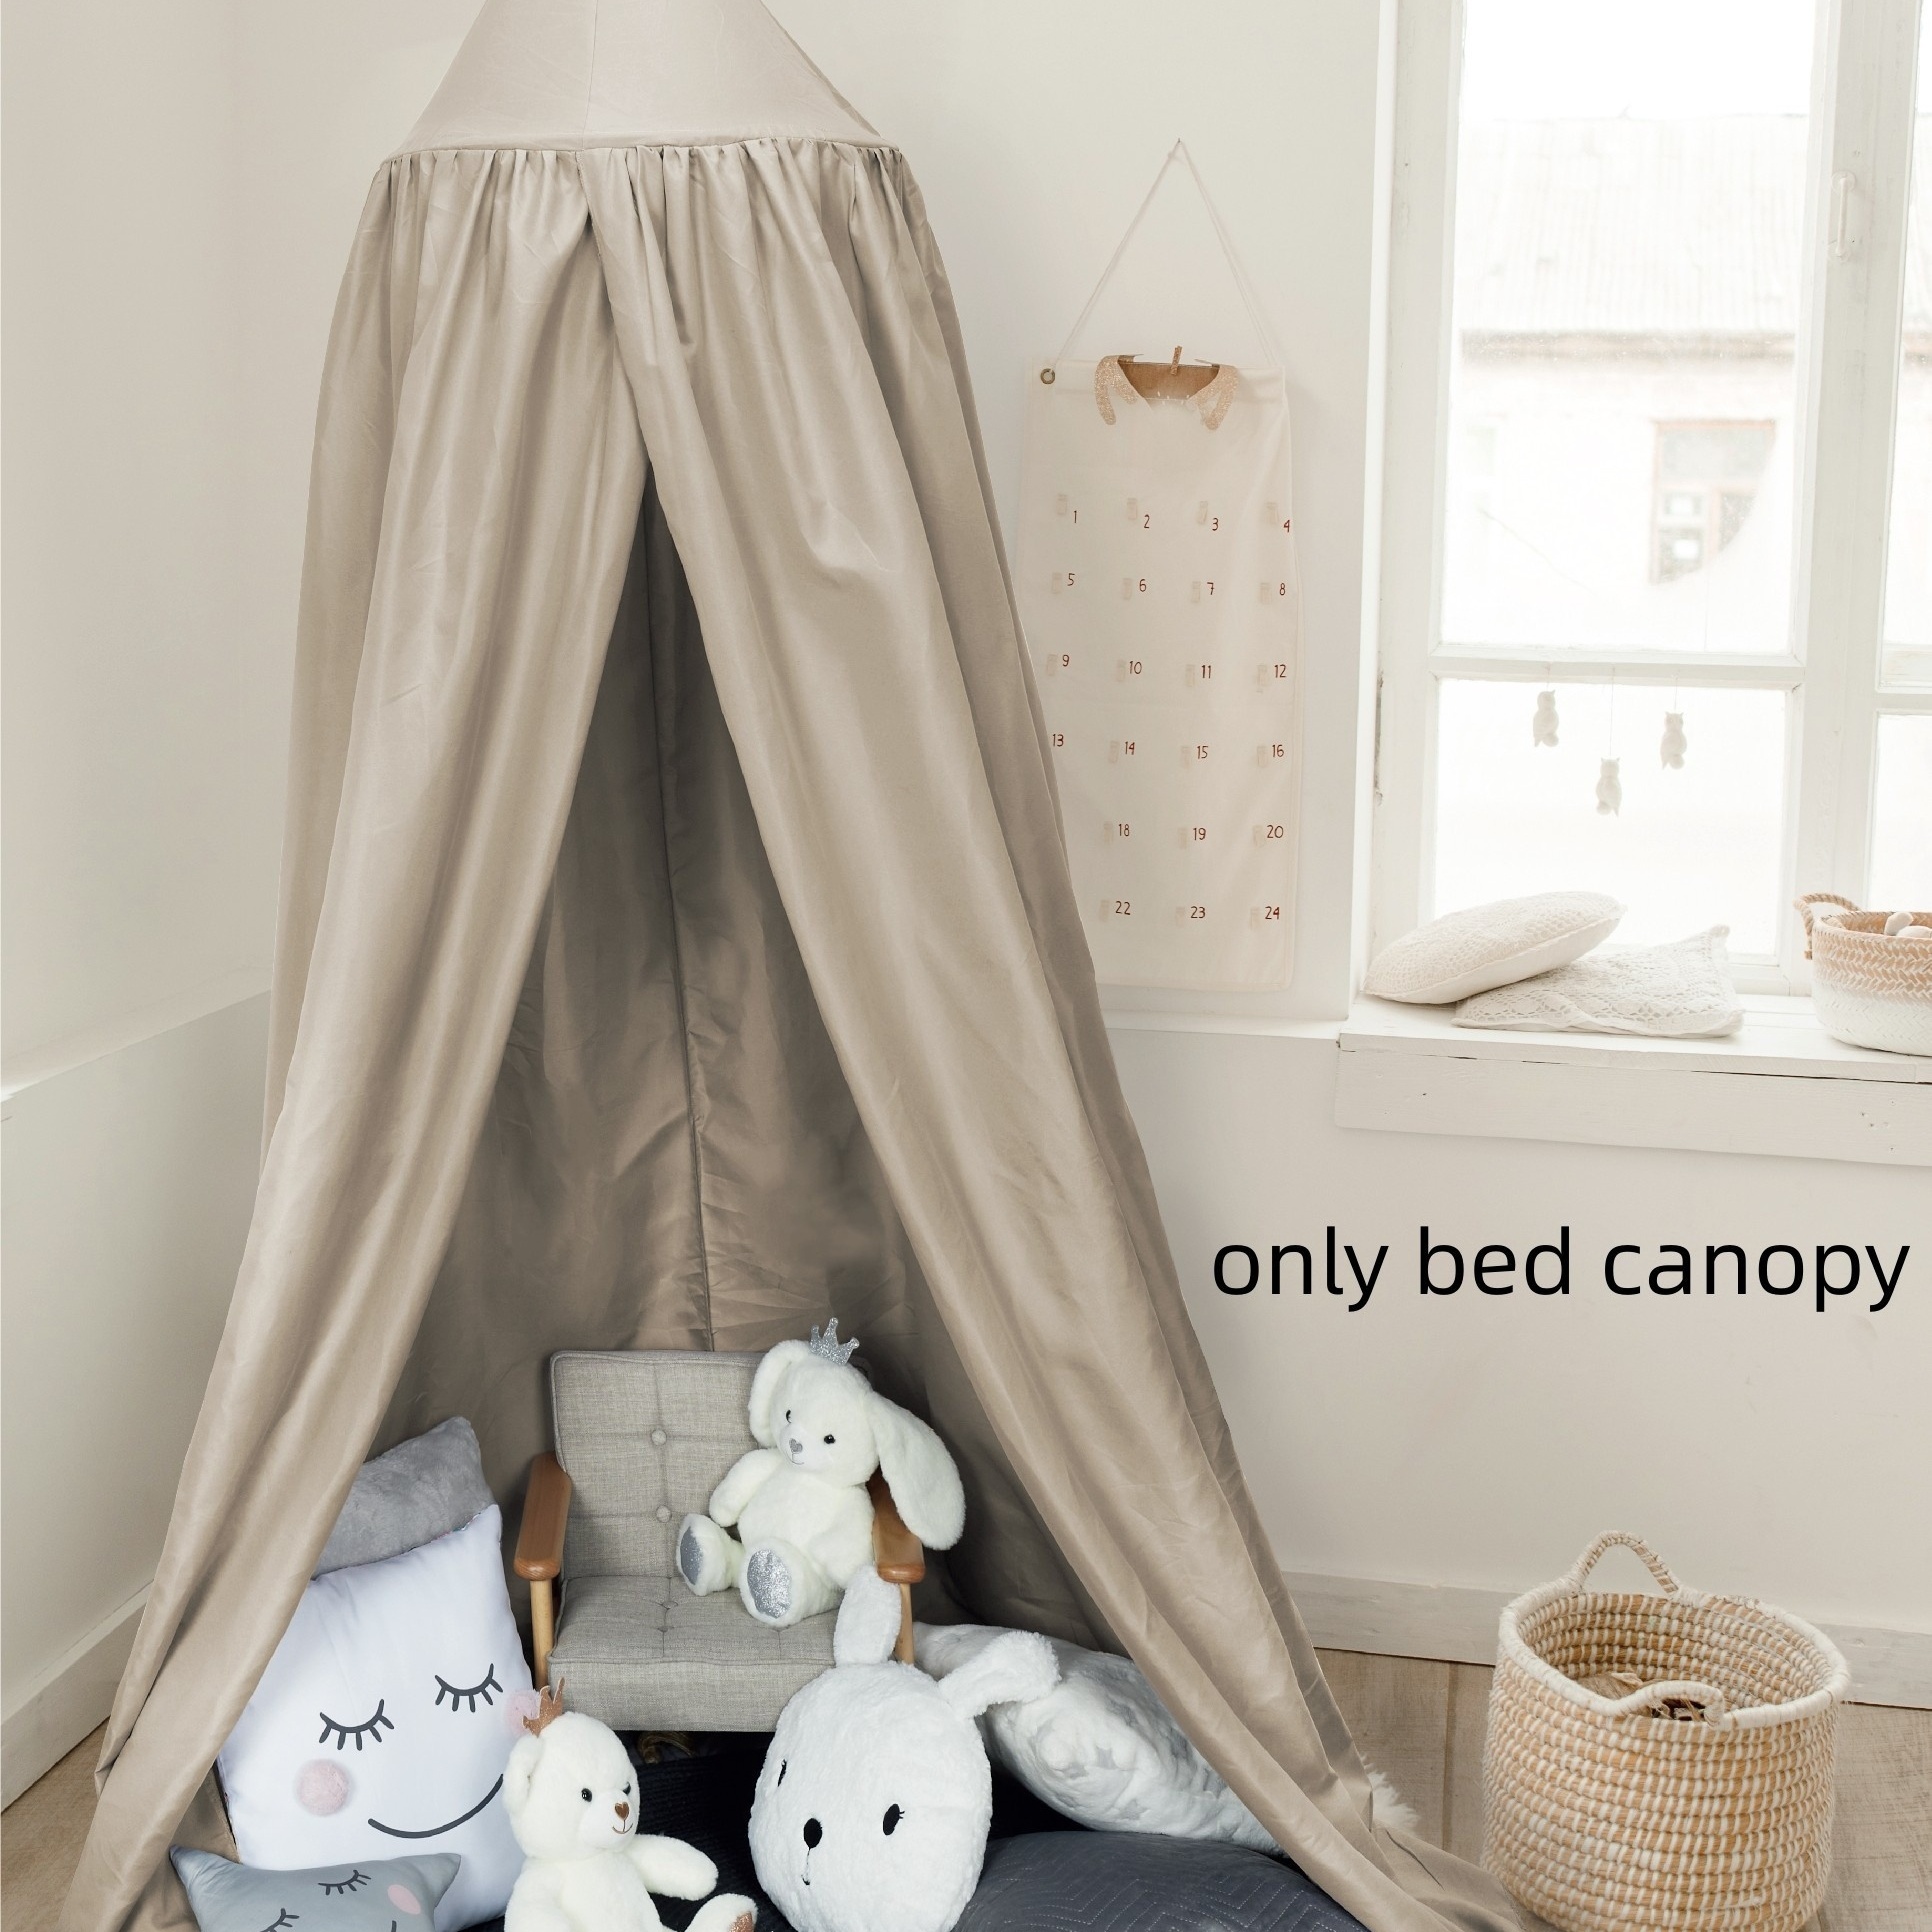 1pc Bed Canopy, Mosquito Net Bedding Accessories For Bedroom Dorm Room